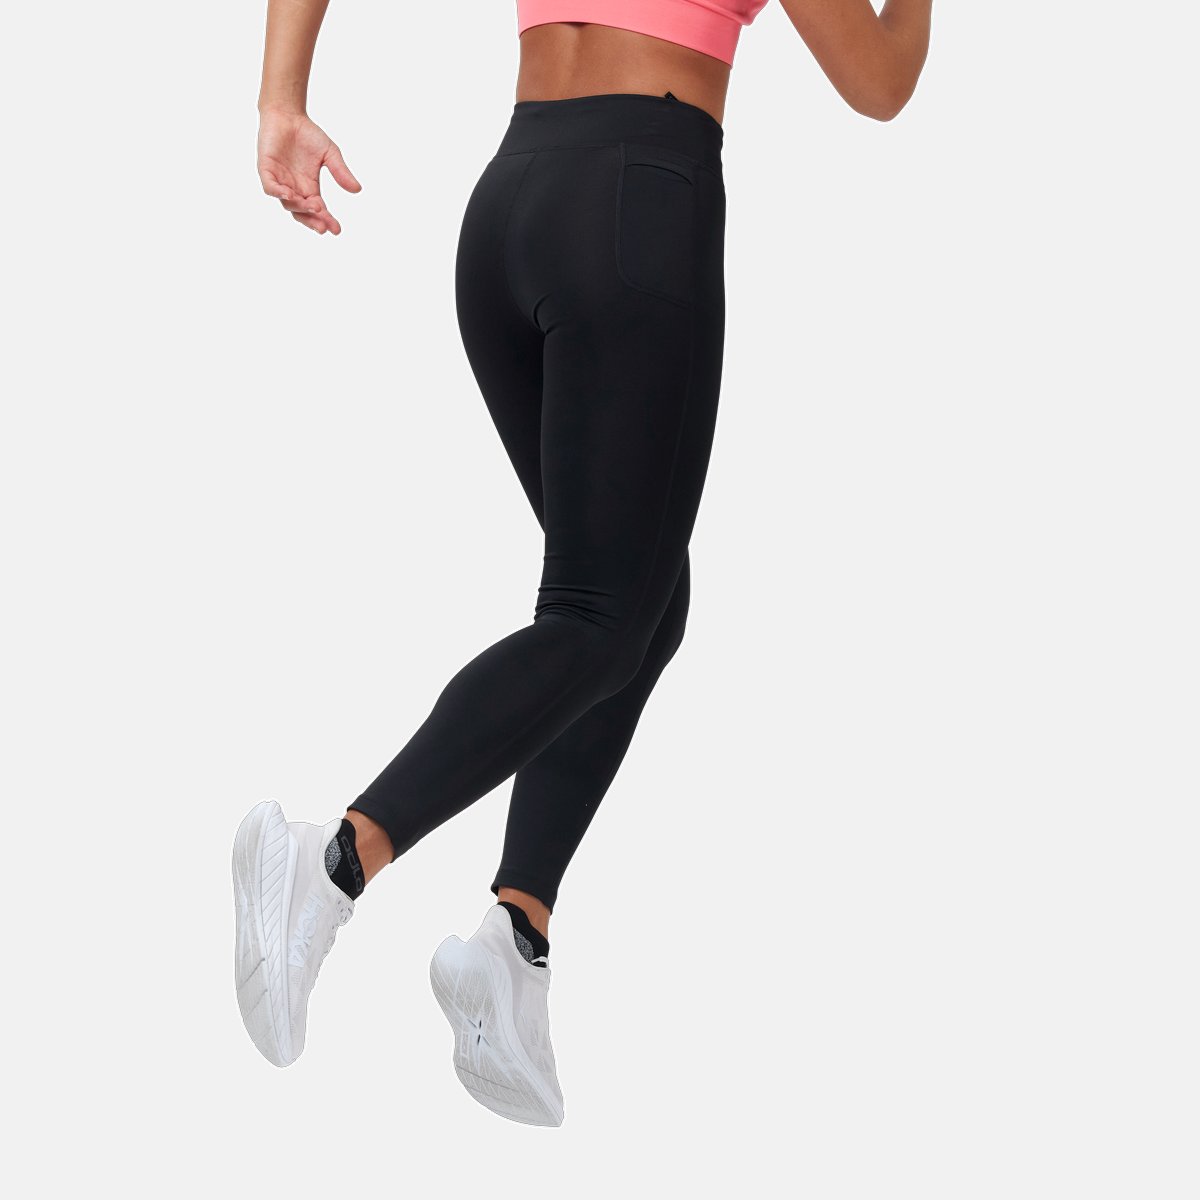 Women's The Essential Running Tights Black, Buy Women's The Essential  Running Tights Black here